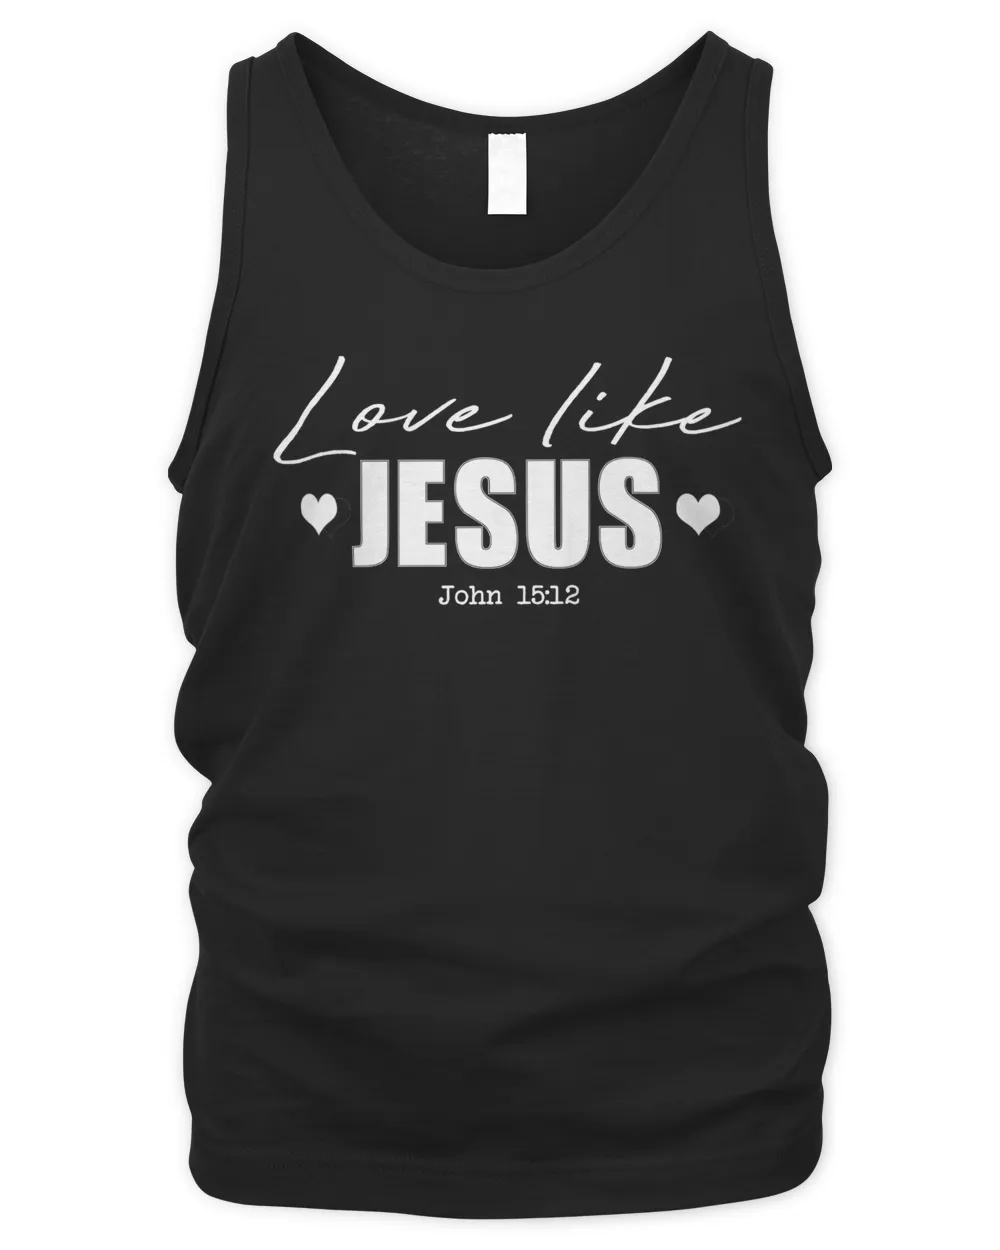 Love Like Jesus t-Shirt, Dear Person Behind me, Christian Shirt, Jesus Love You Beyond Measure, Gift for her t-Shirt, Front and Back